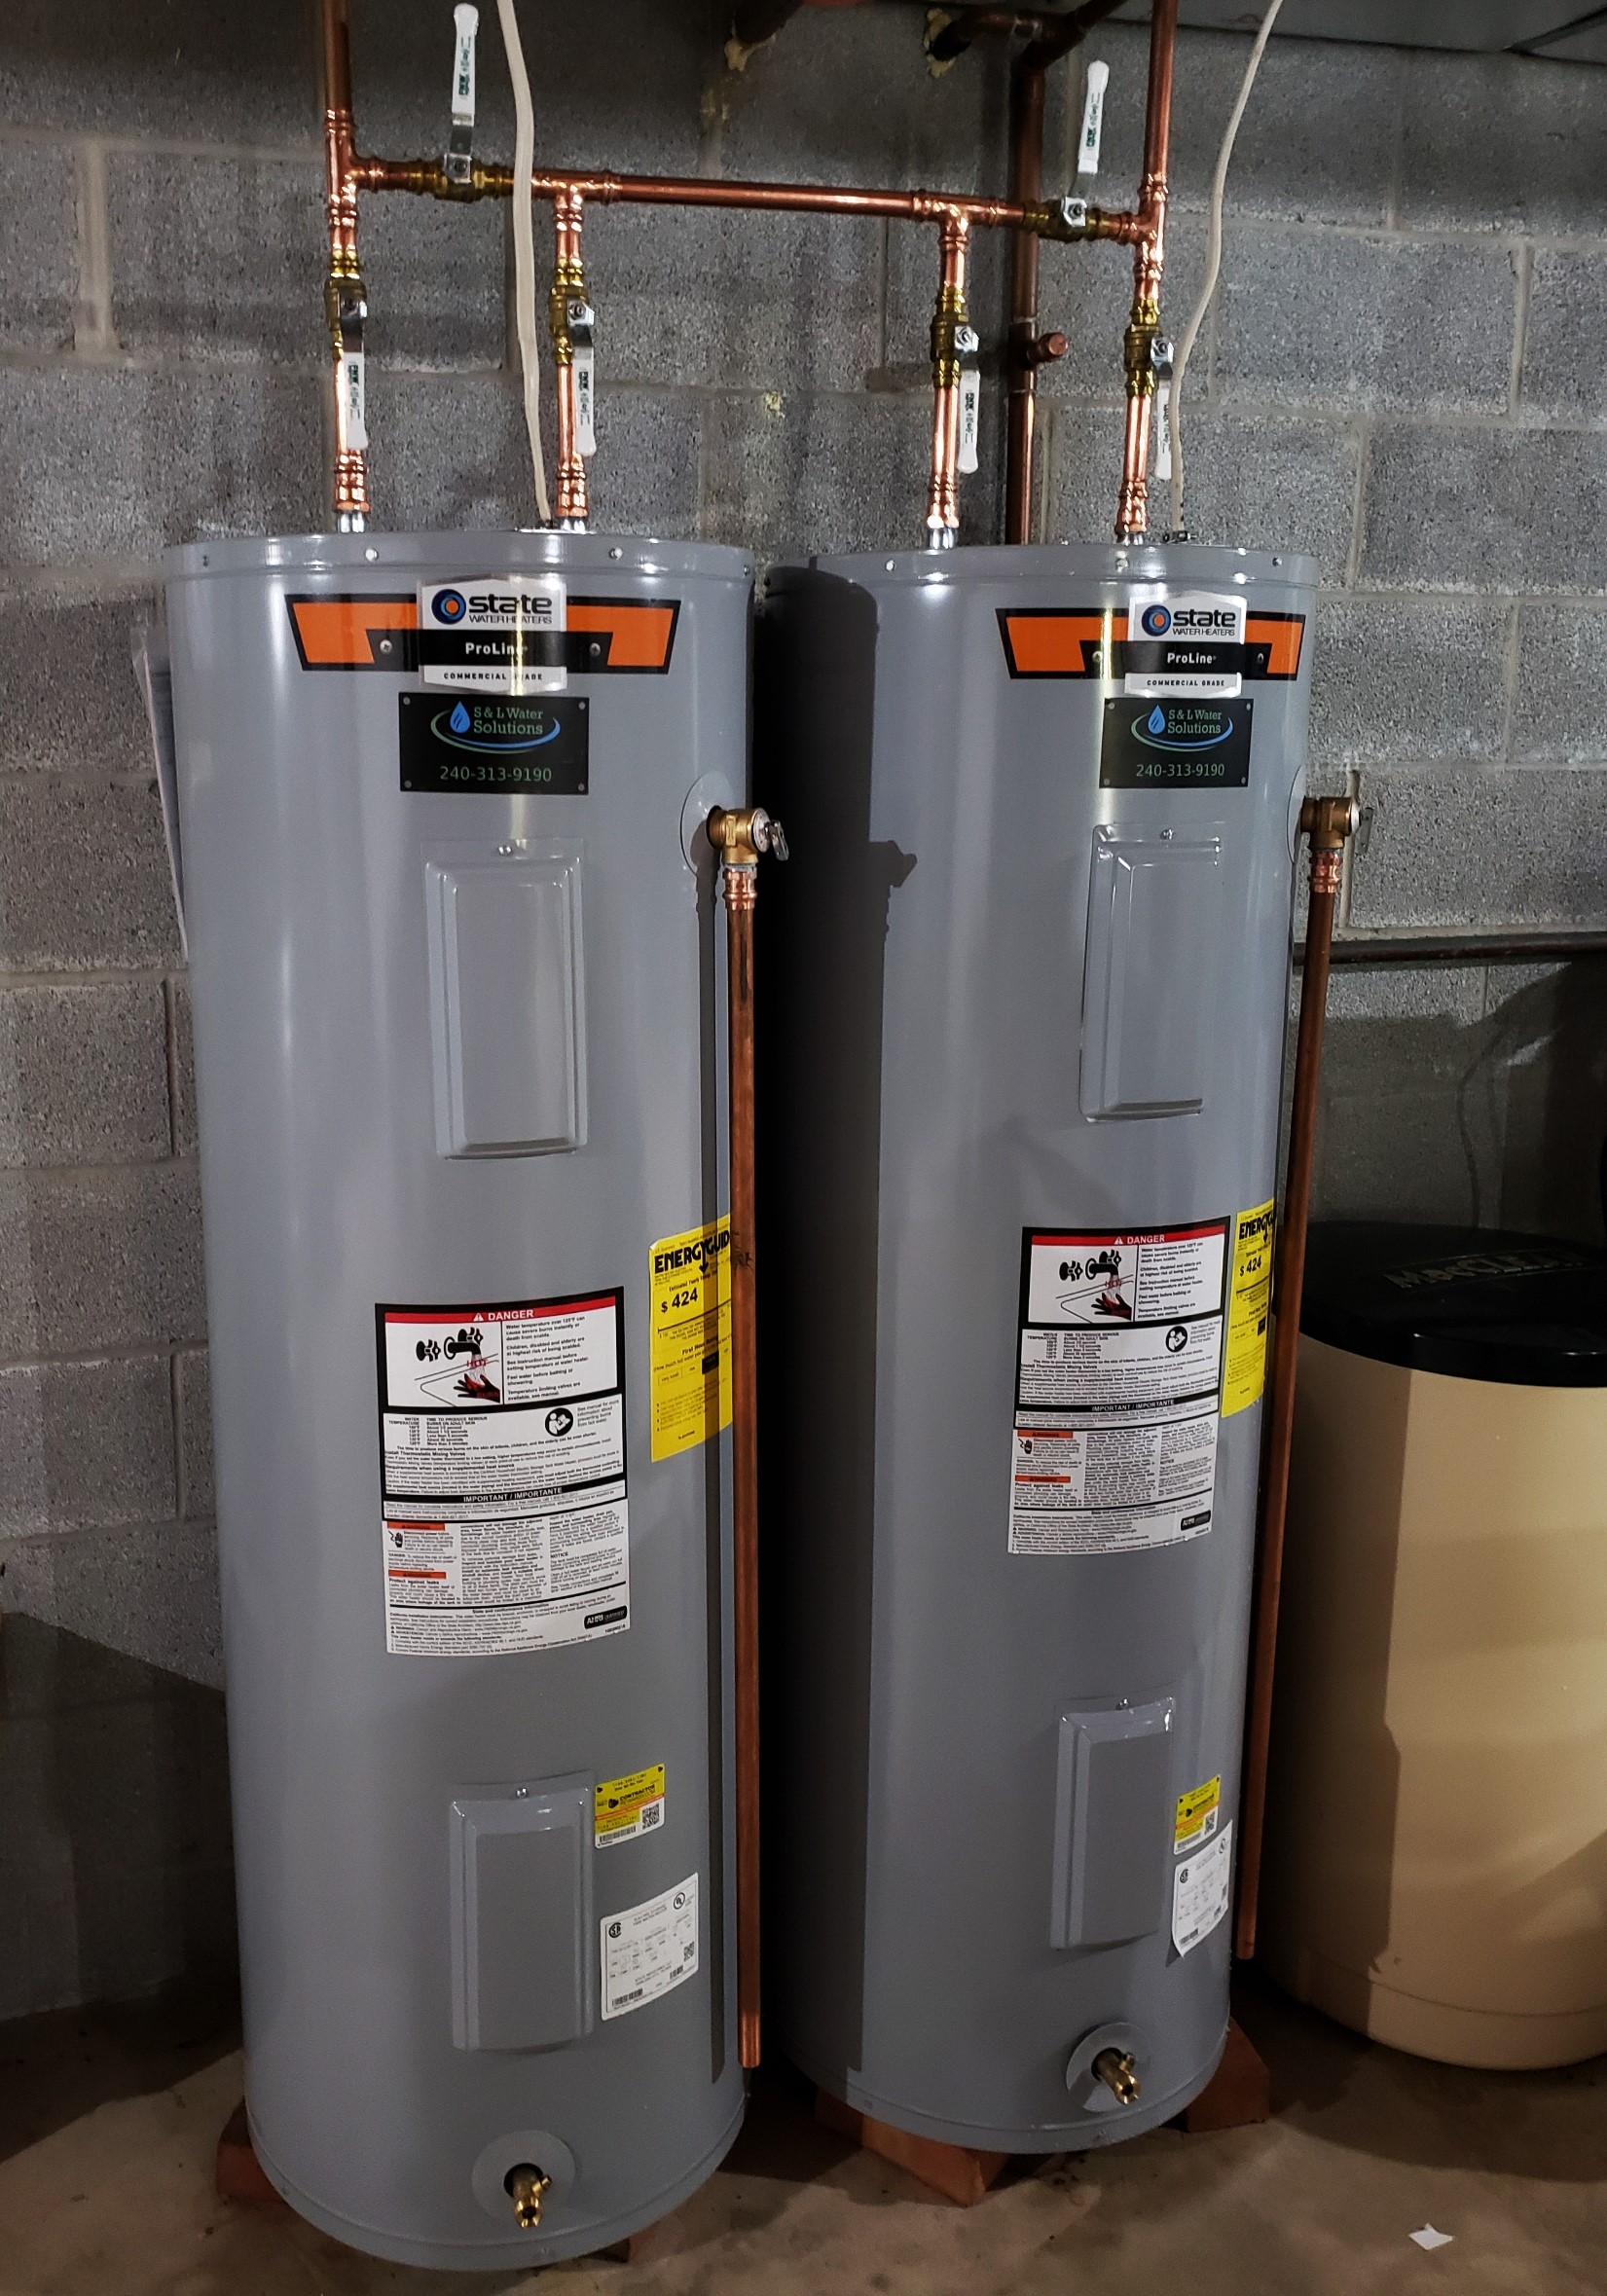 Hot Water Heater replacement in Maryland